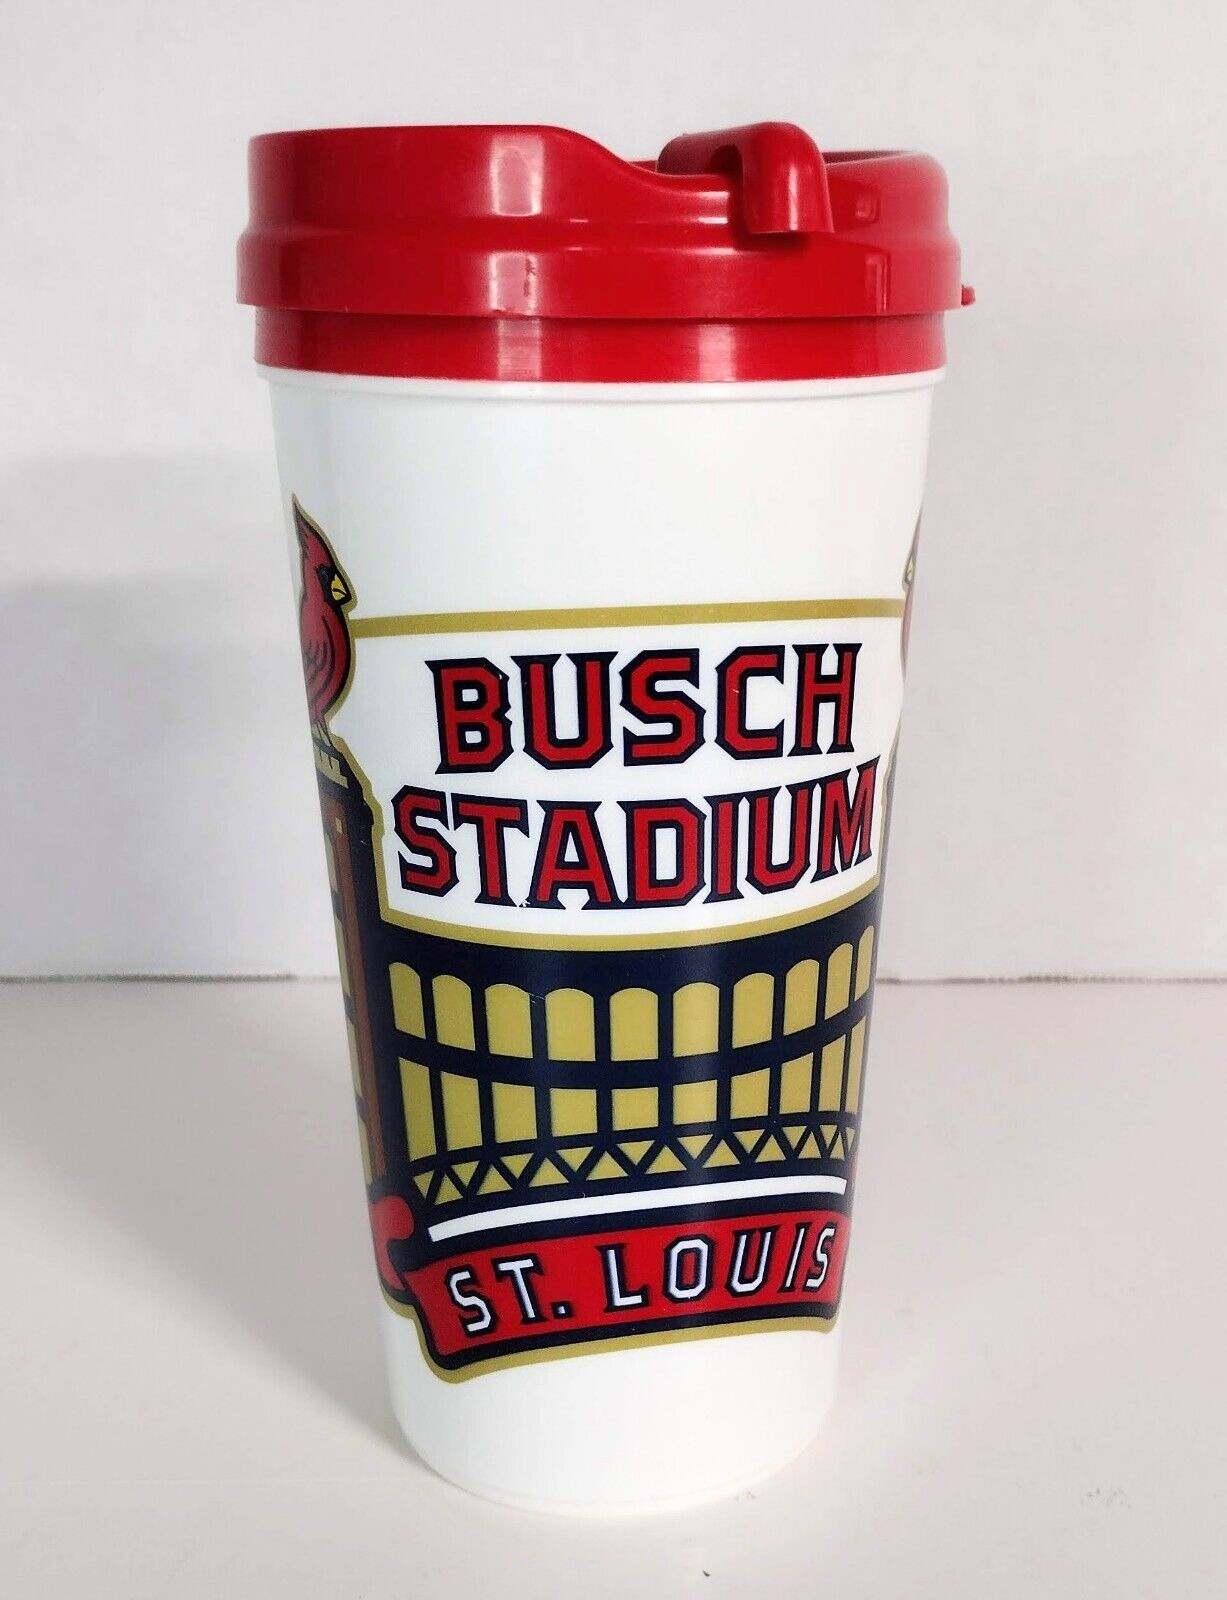 STL Cardinals Tall Plastic Busch Stadium Drink Cup Red White 2006 MLB Whirley 7